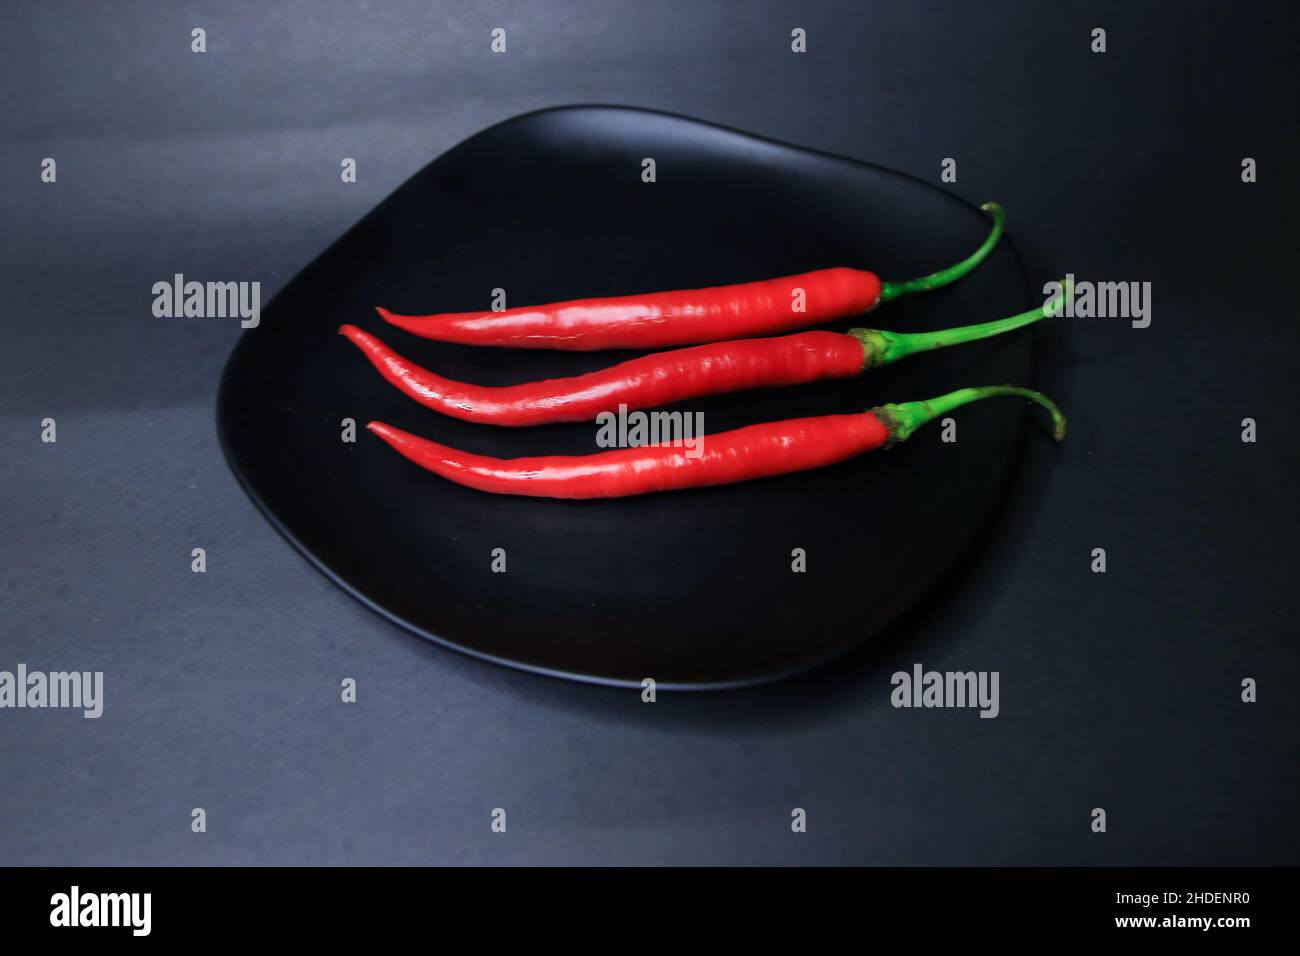 three chili peppers on a black plate Stock Photo